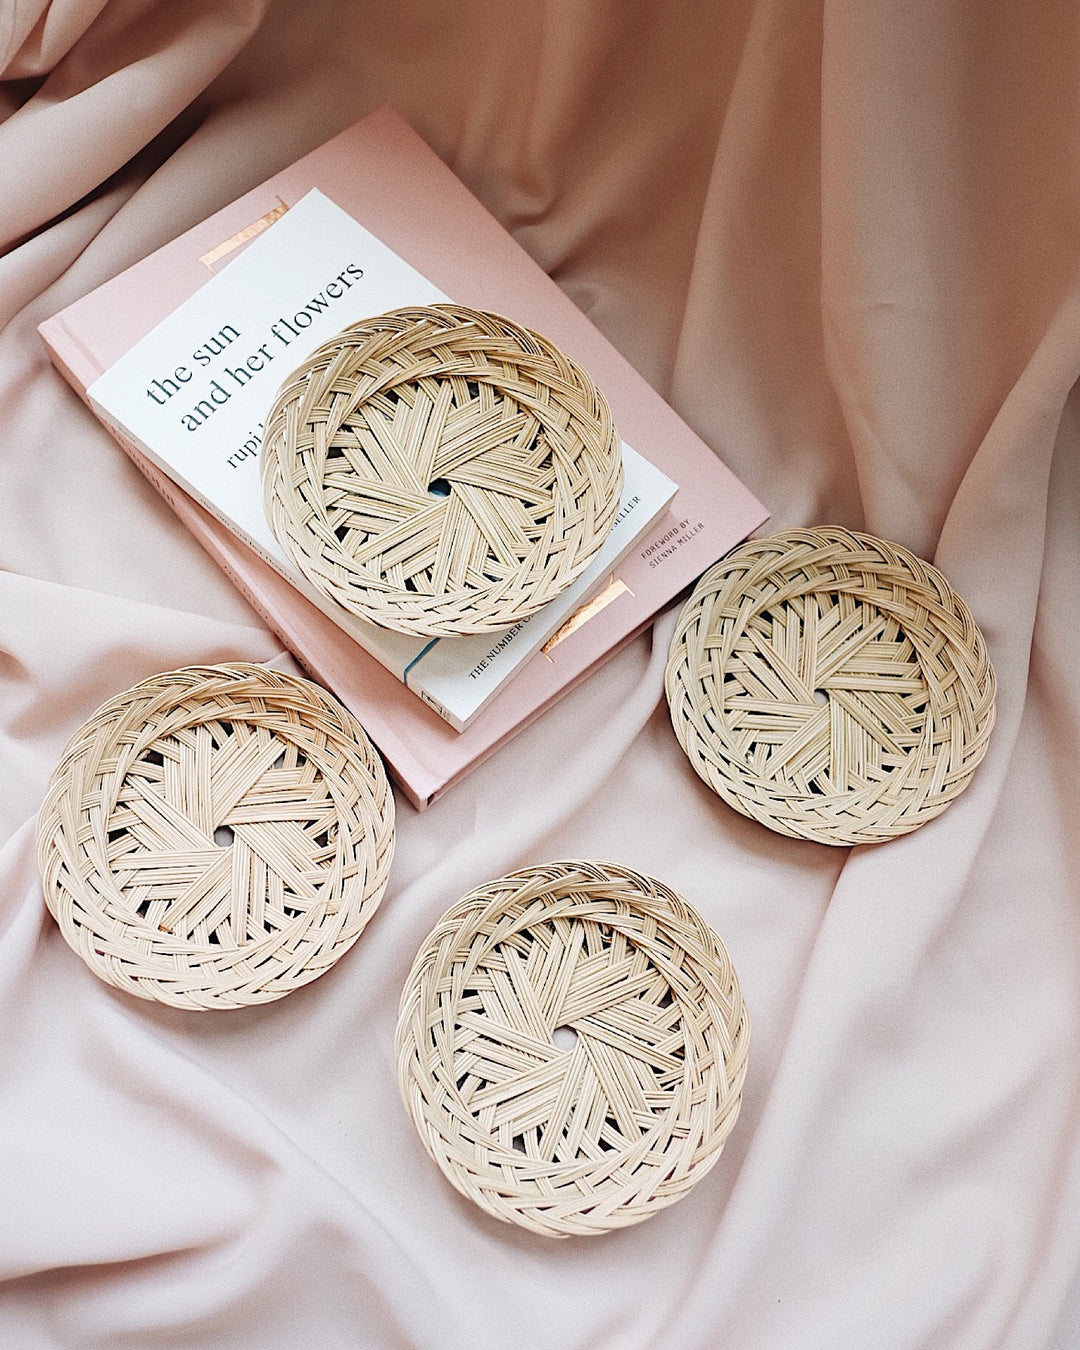 Petite Lily Handwoven Plate | Olive & Iris 